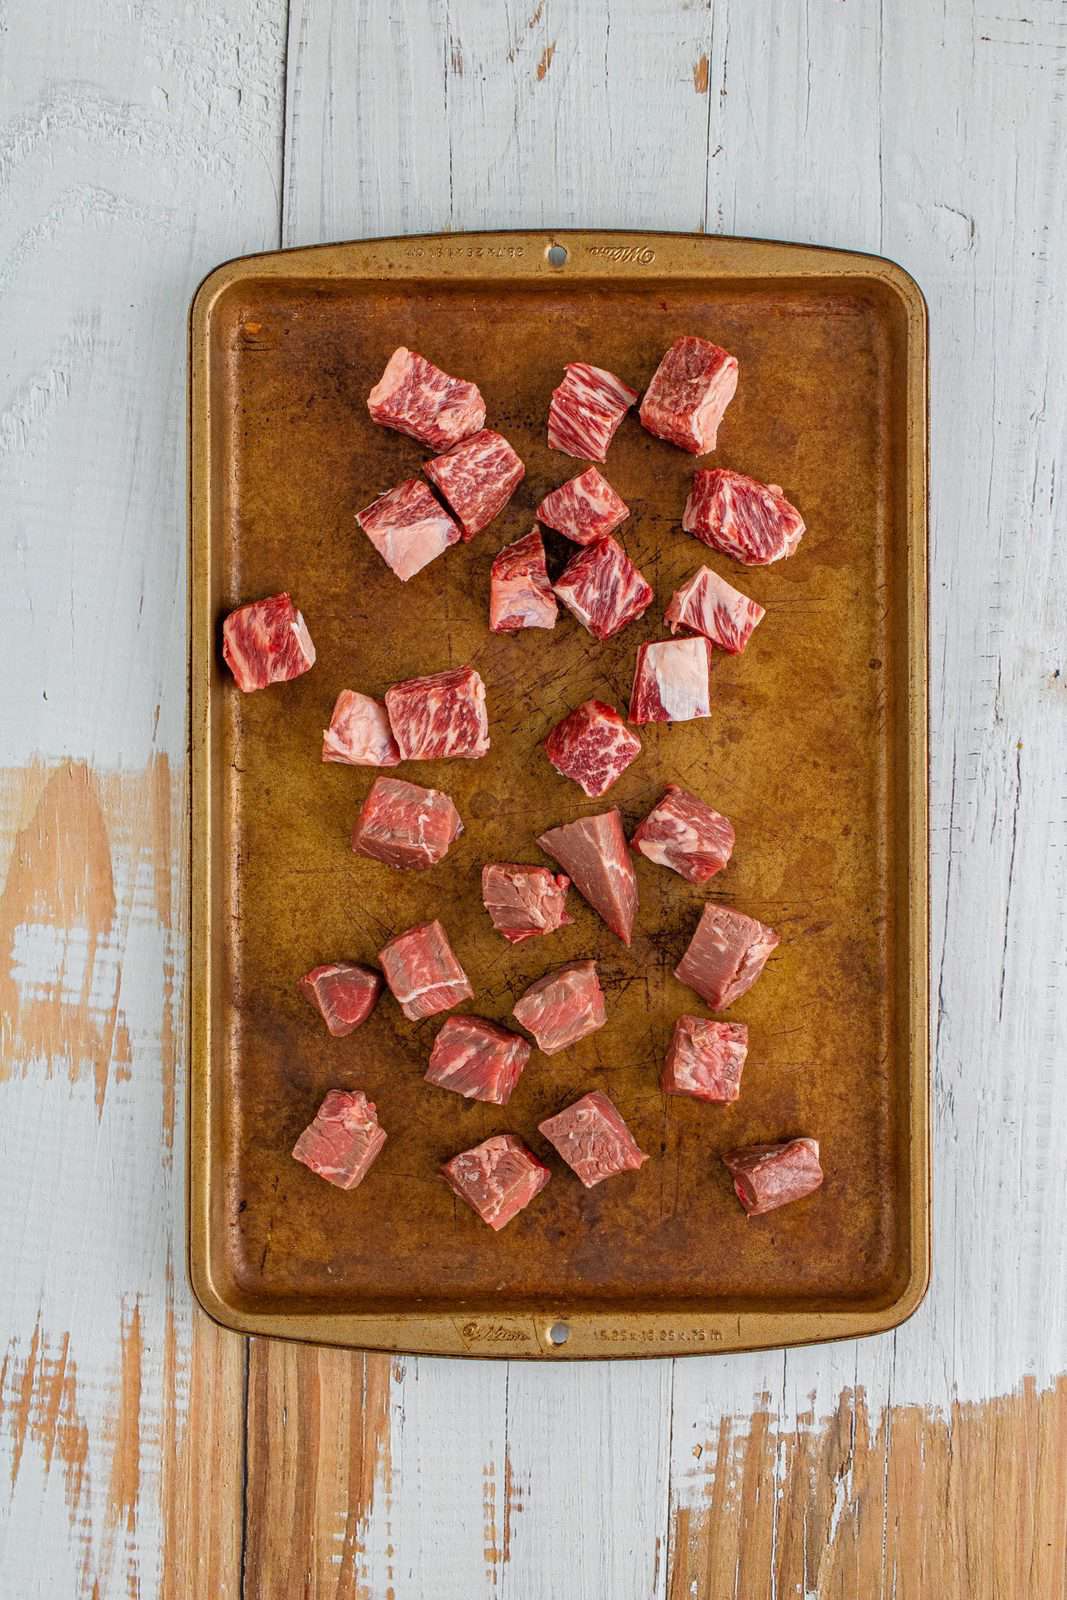 meat cubes shown on a cookie sheet